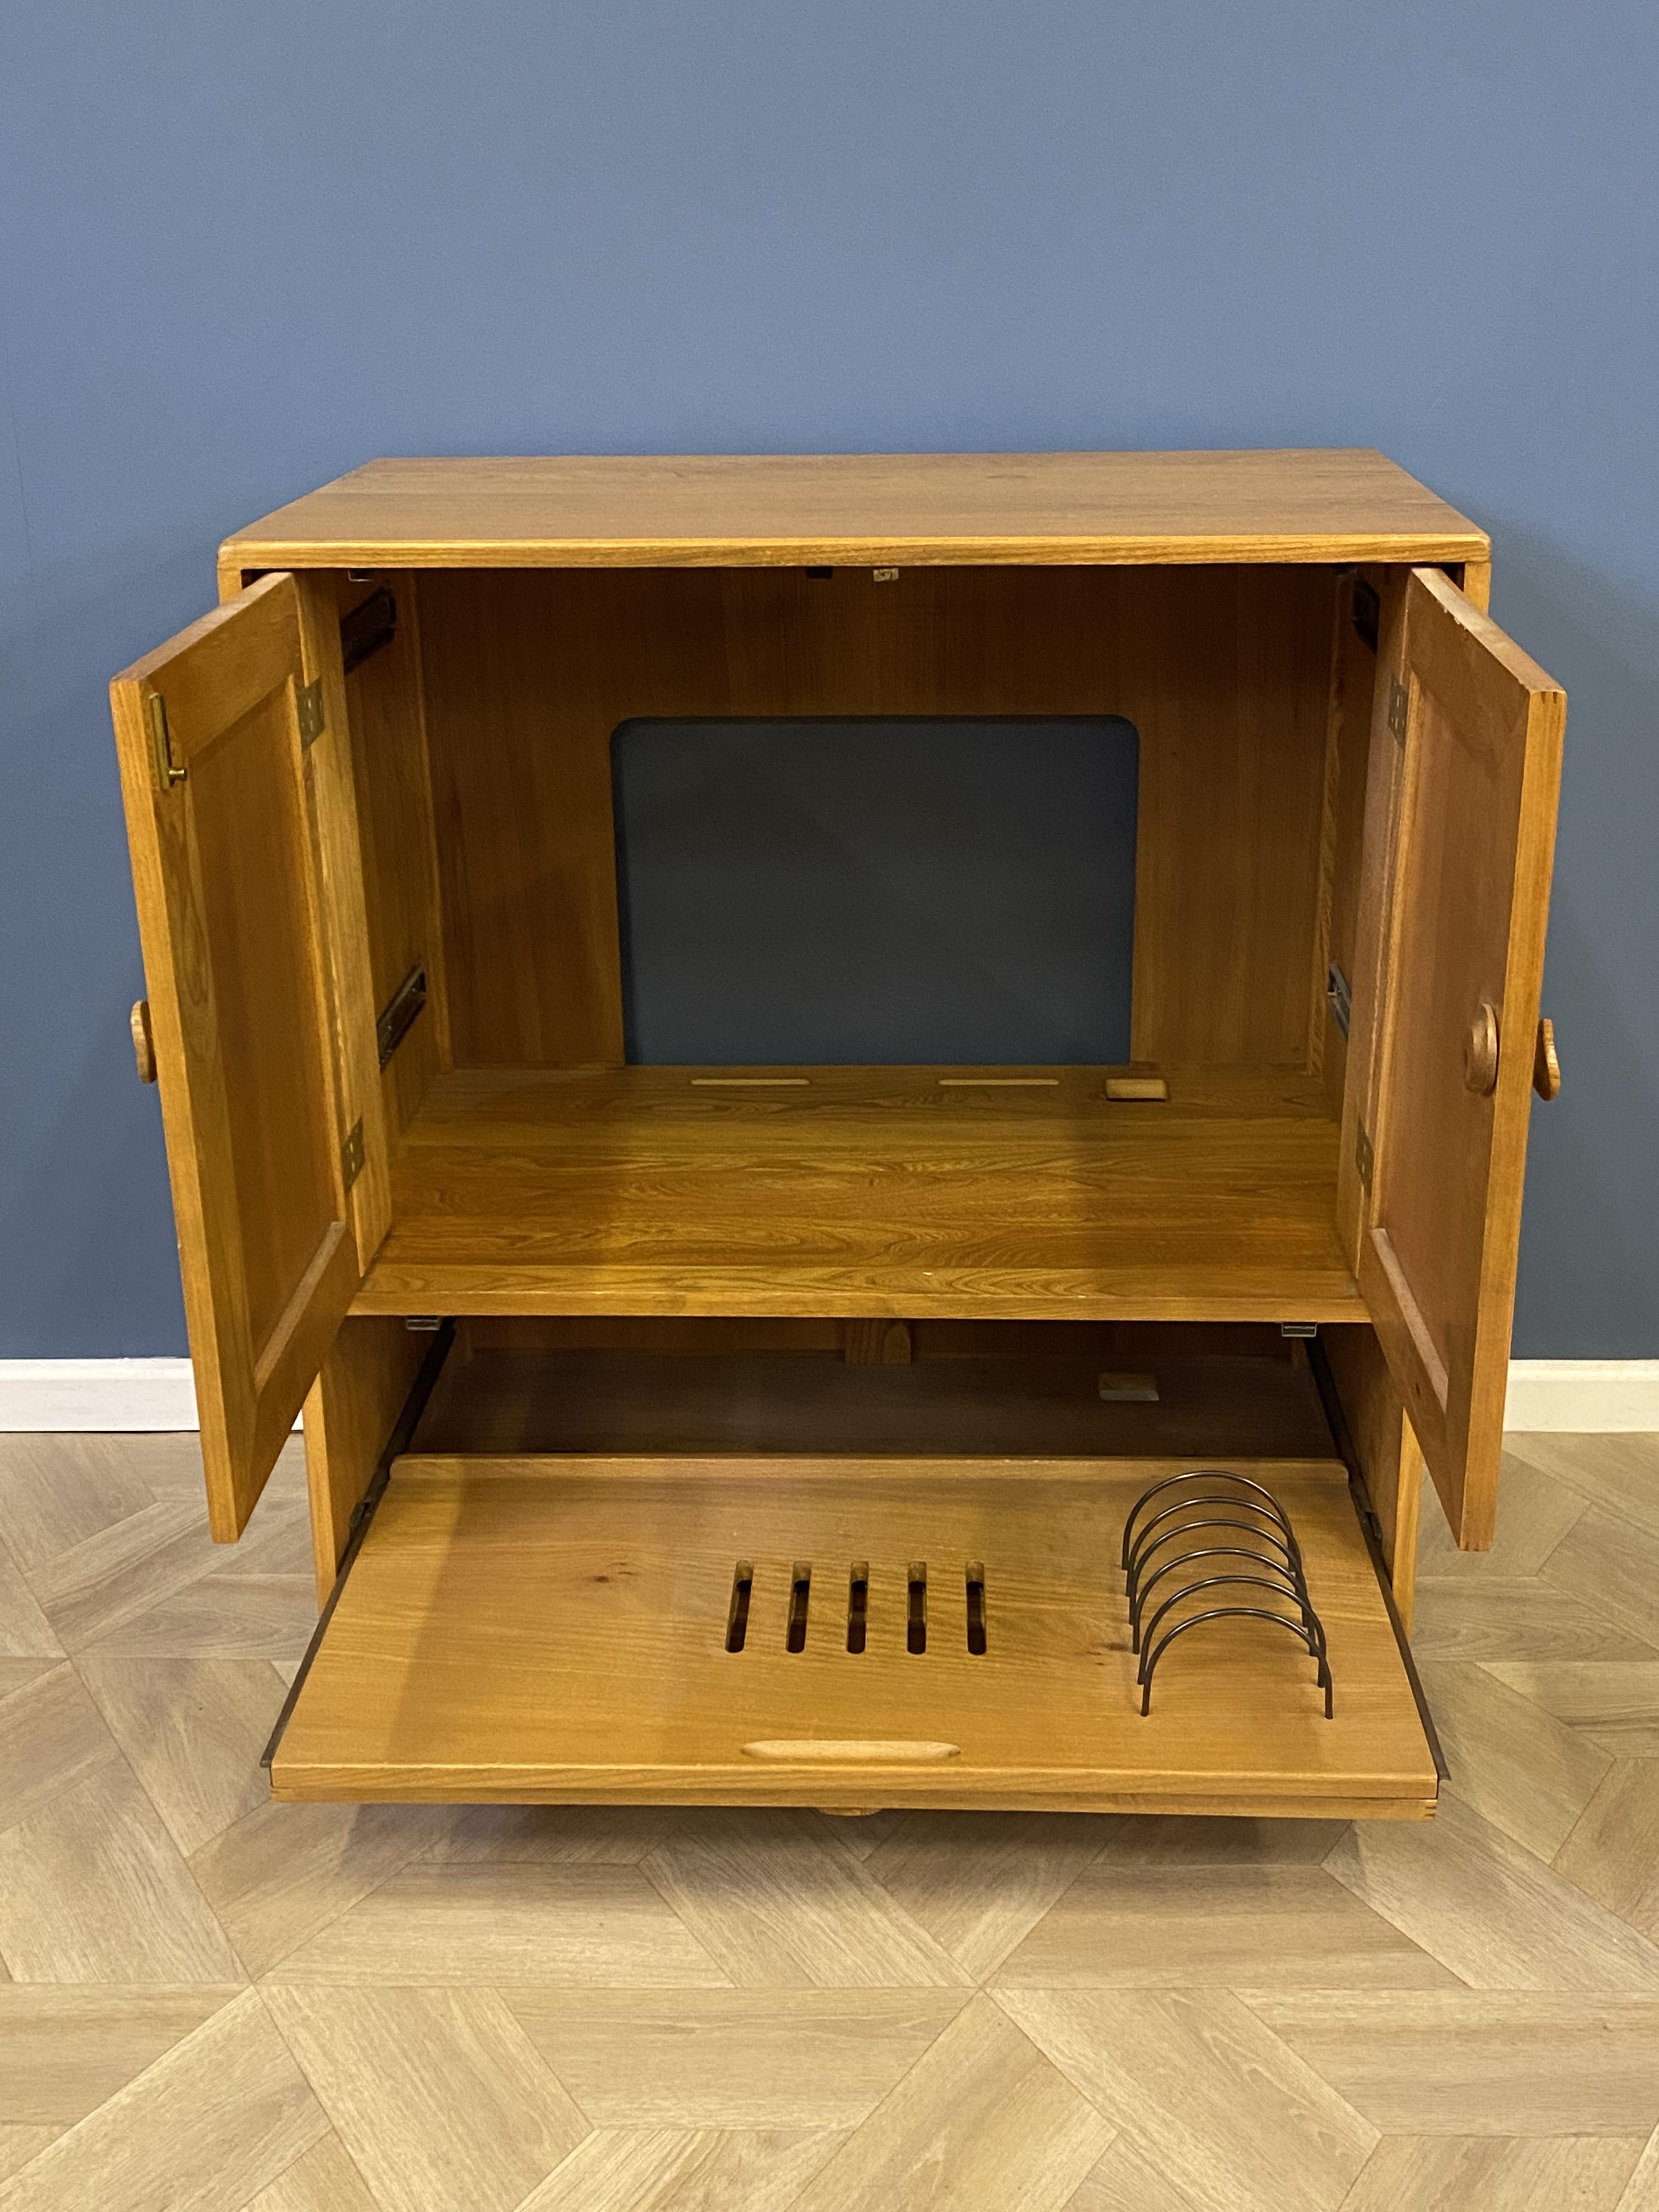 Ercol style television cabinet - Image 7 of 7